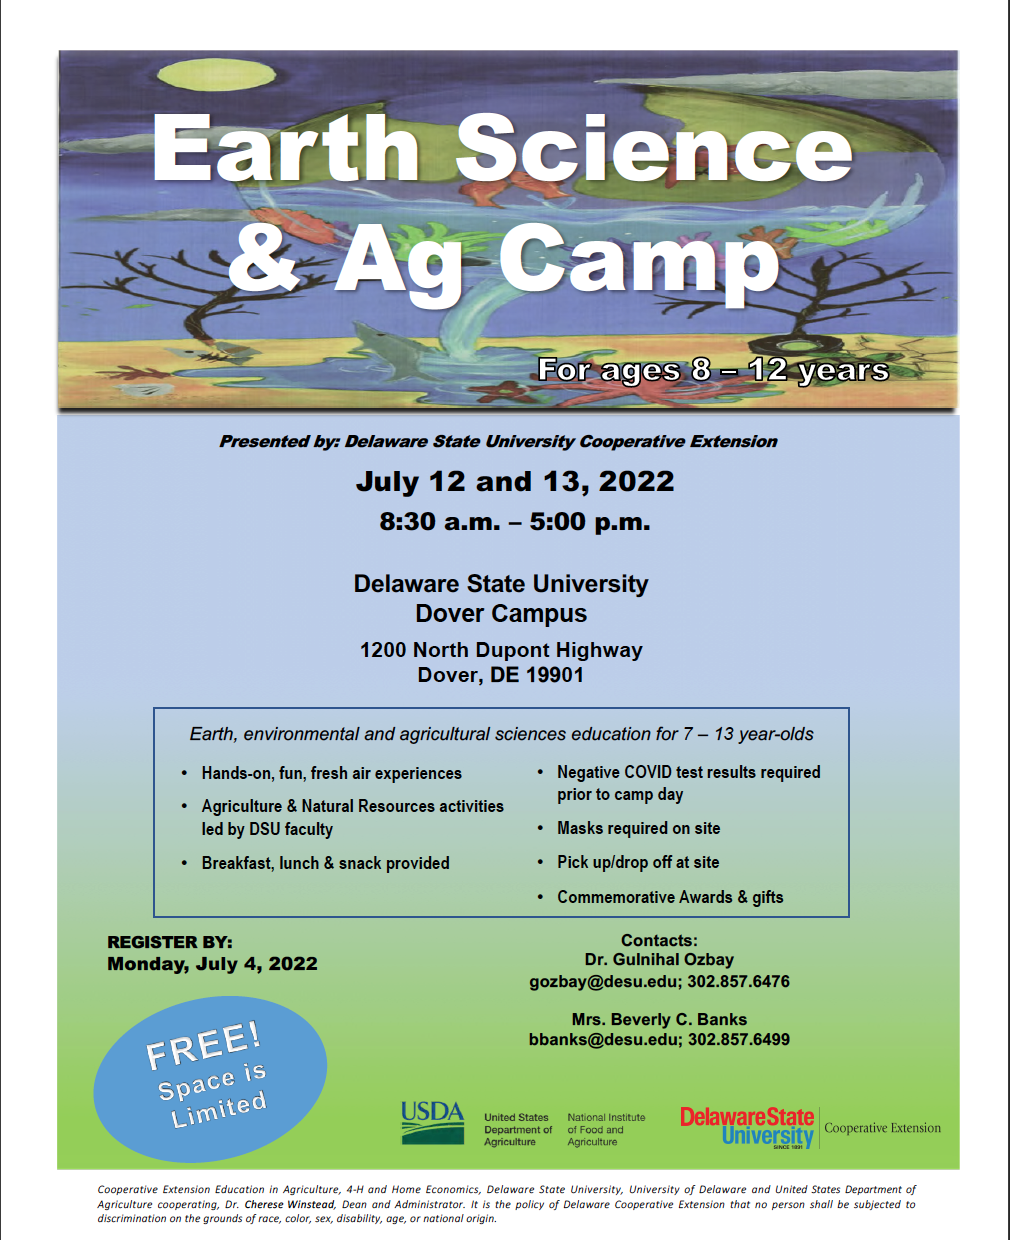 Earth Science and Ag Camp flyer